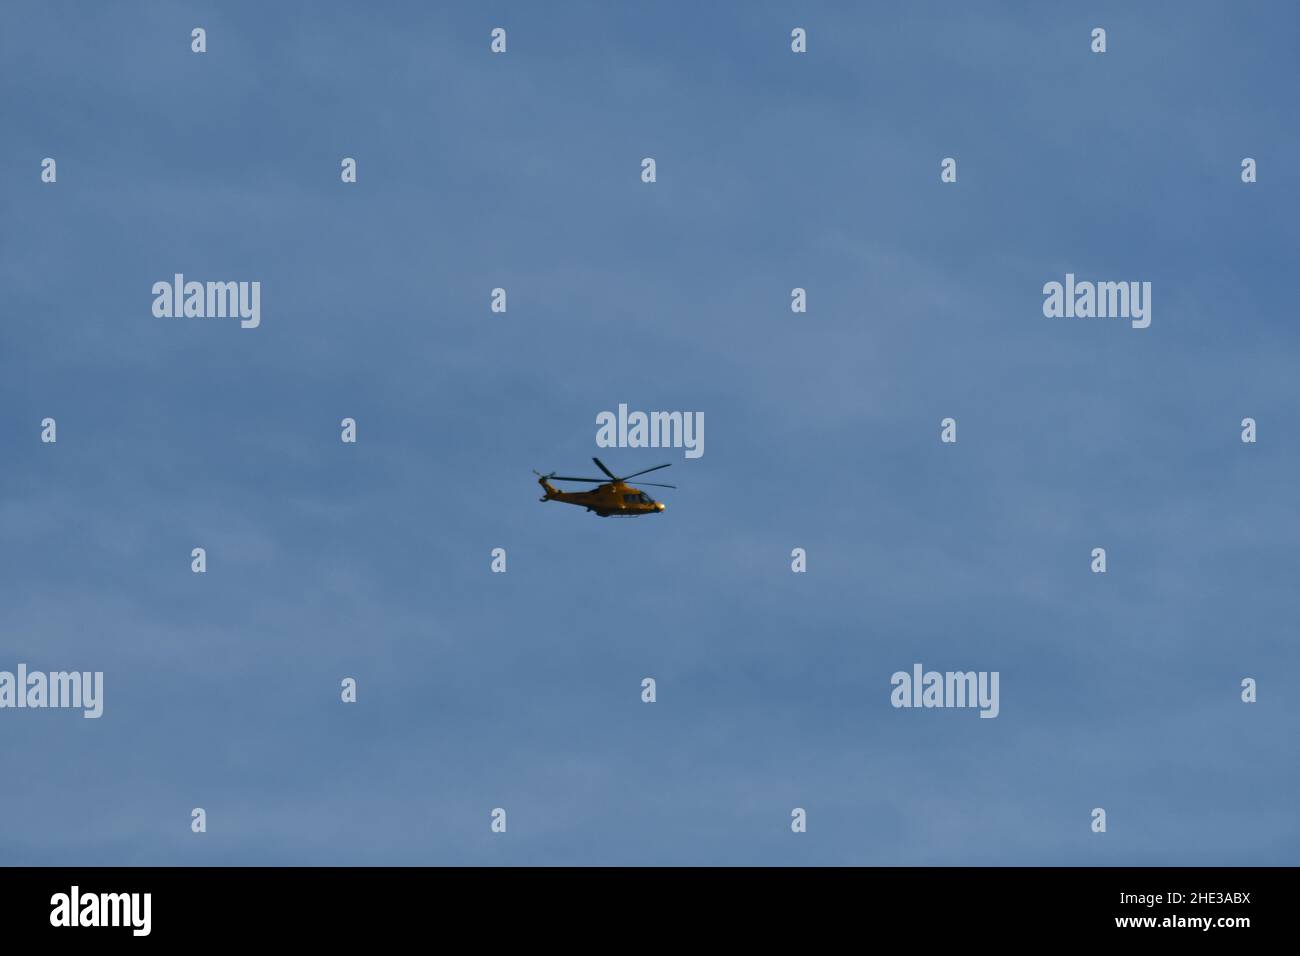 A helicopter flying in the middle of blue sky with patchy clouds Stock Photo